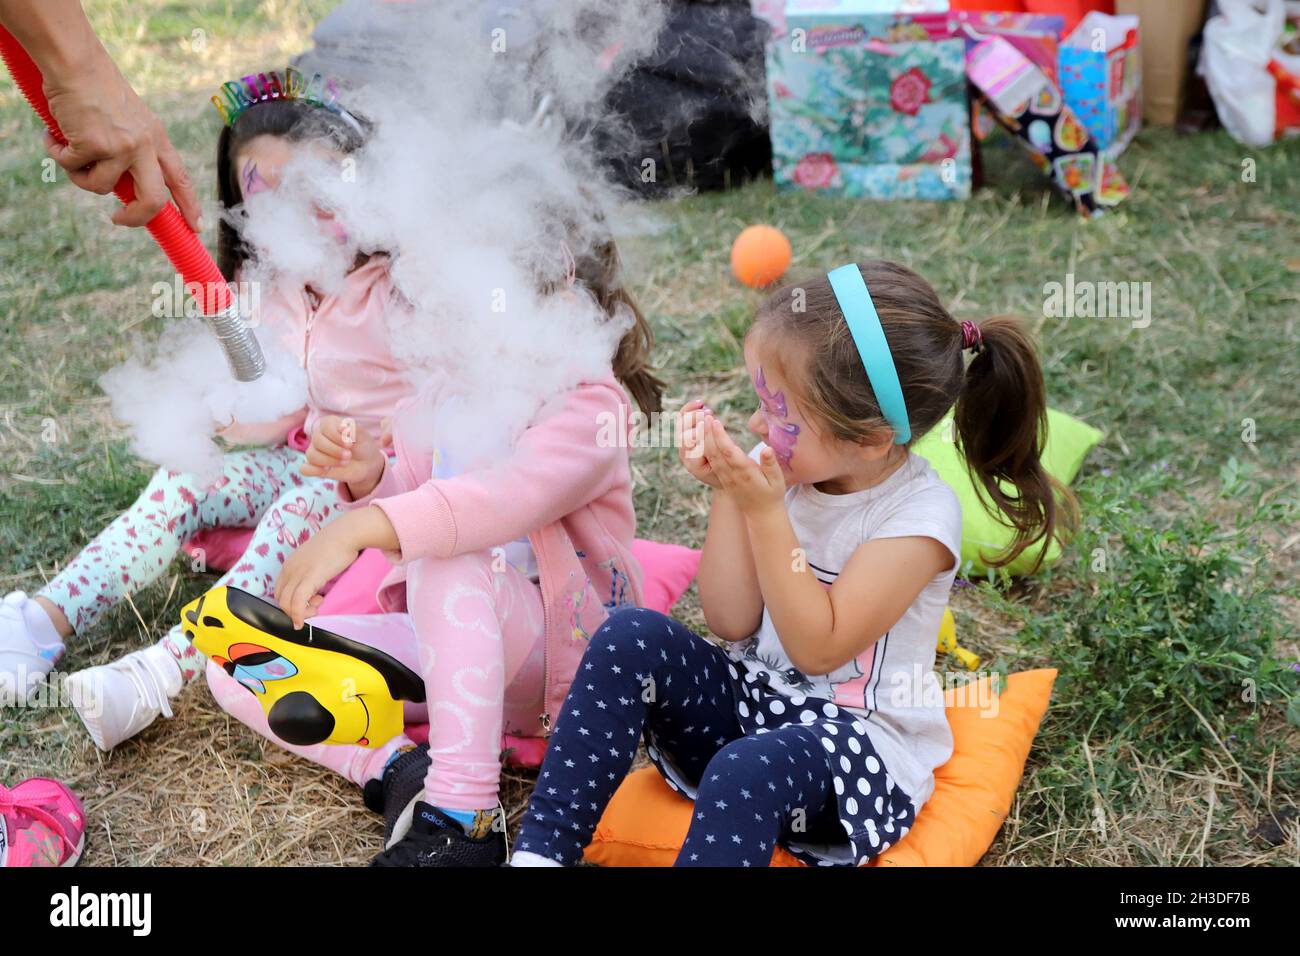 Children's birthday party with tricks and smoke from dry ice. Stock Photo